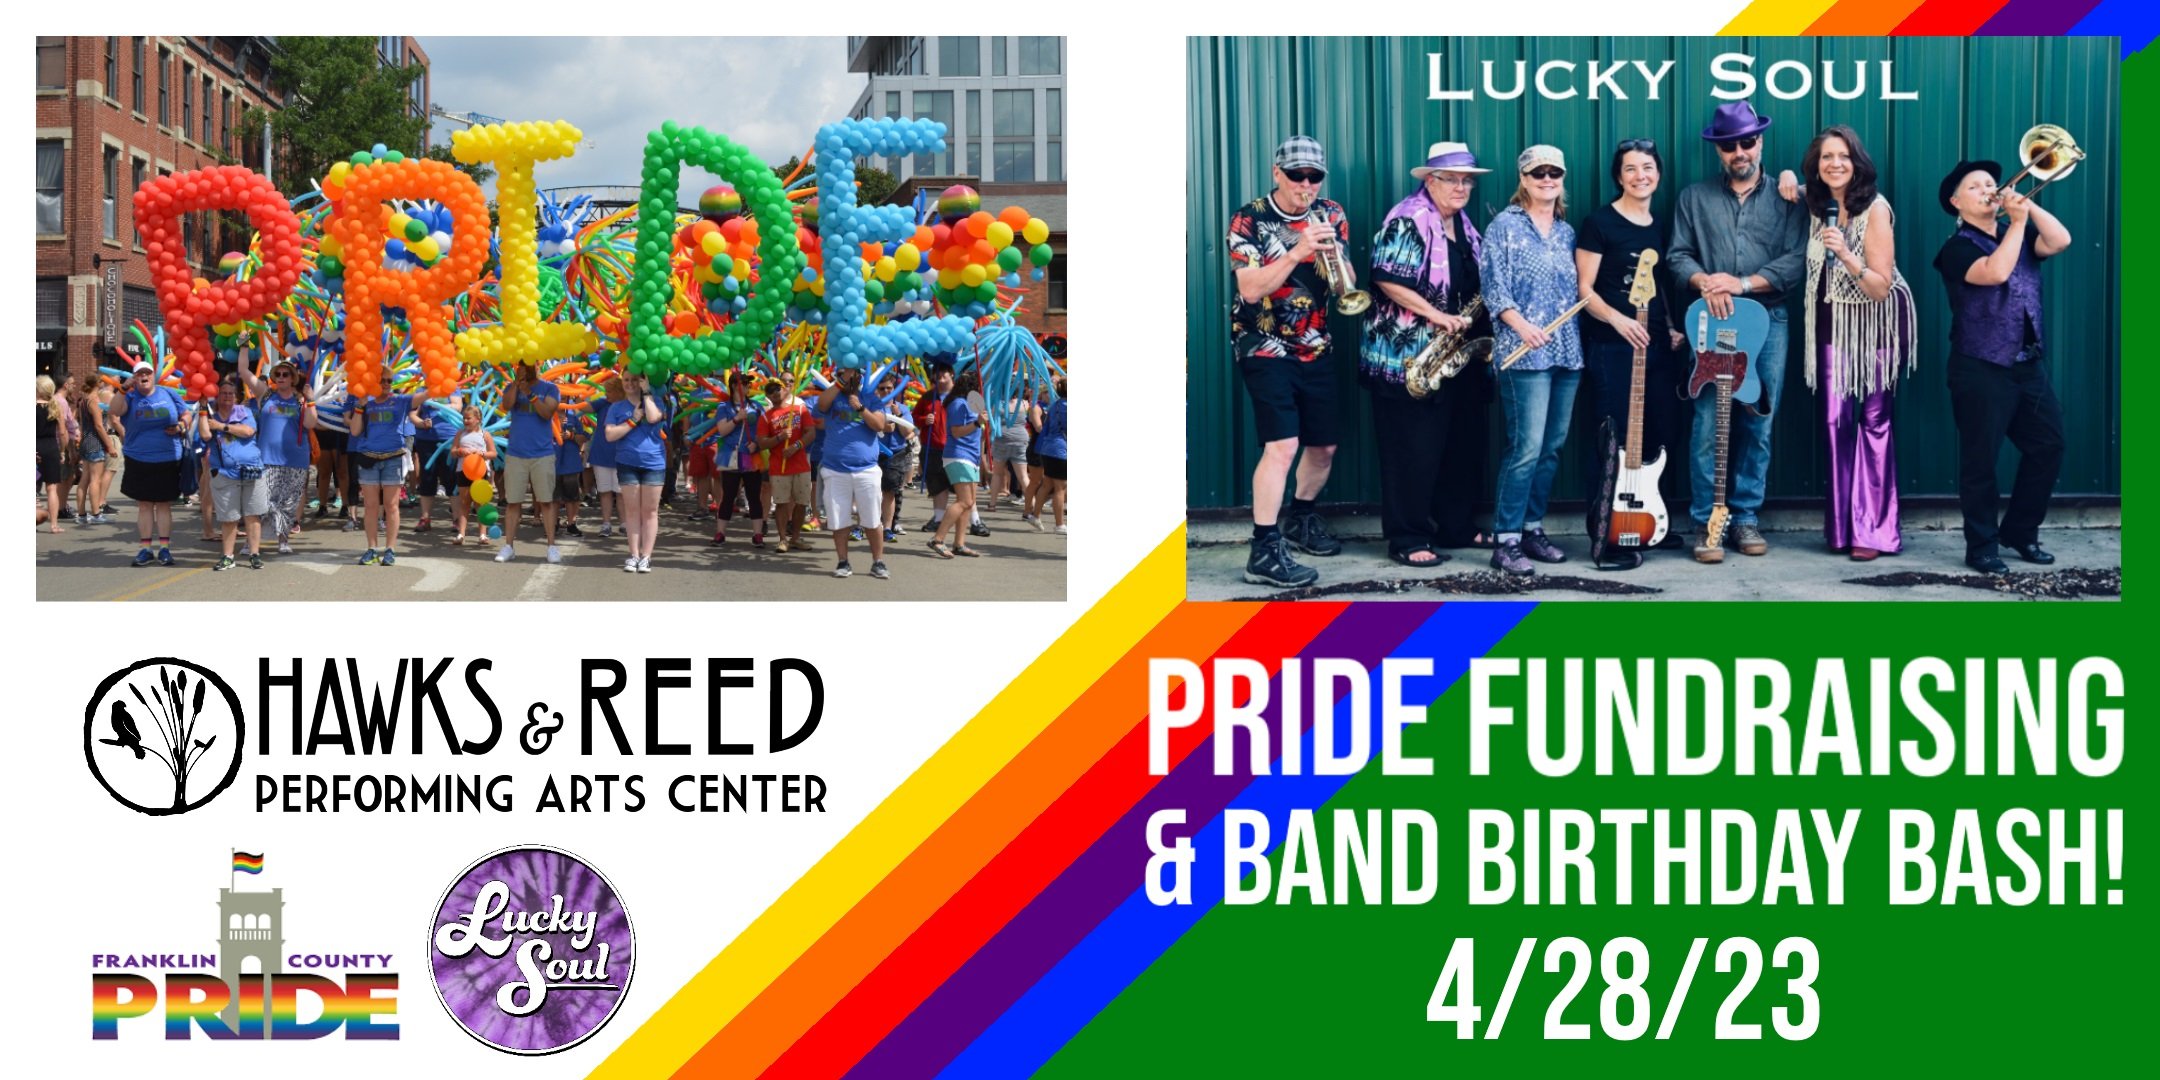 Lucky Soul: Pride fundraising and Birthday Bash